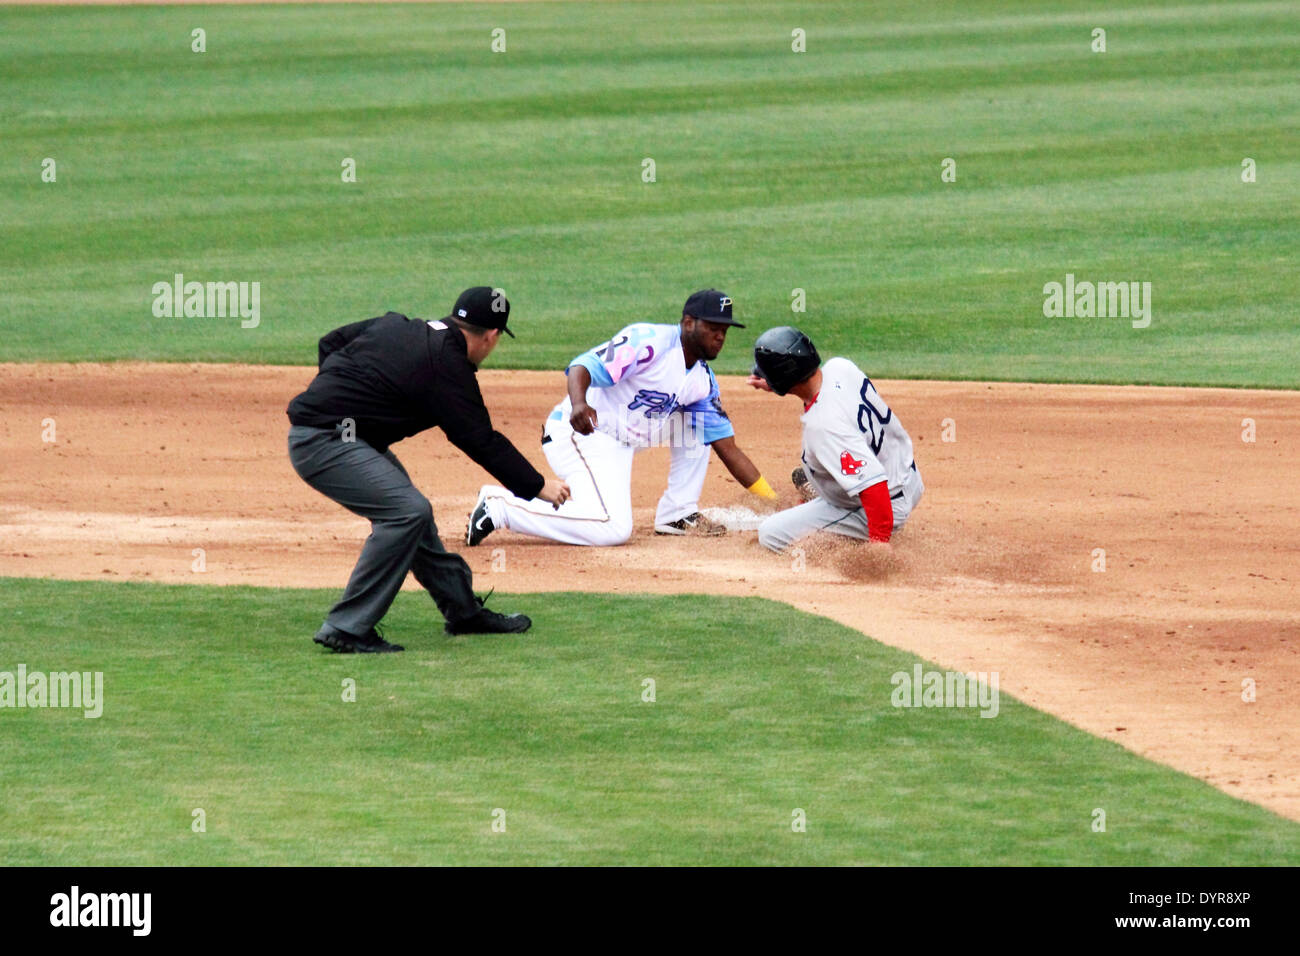 A runner slides into second attempting to steal second base. Stock Photo